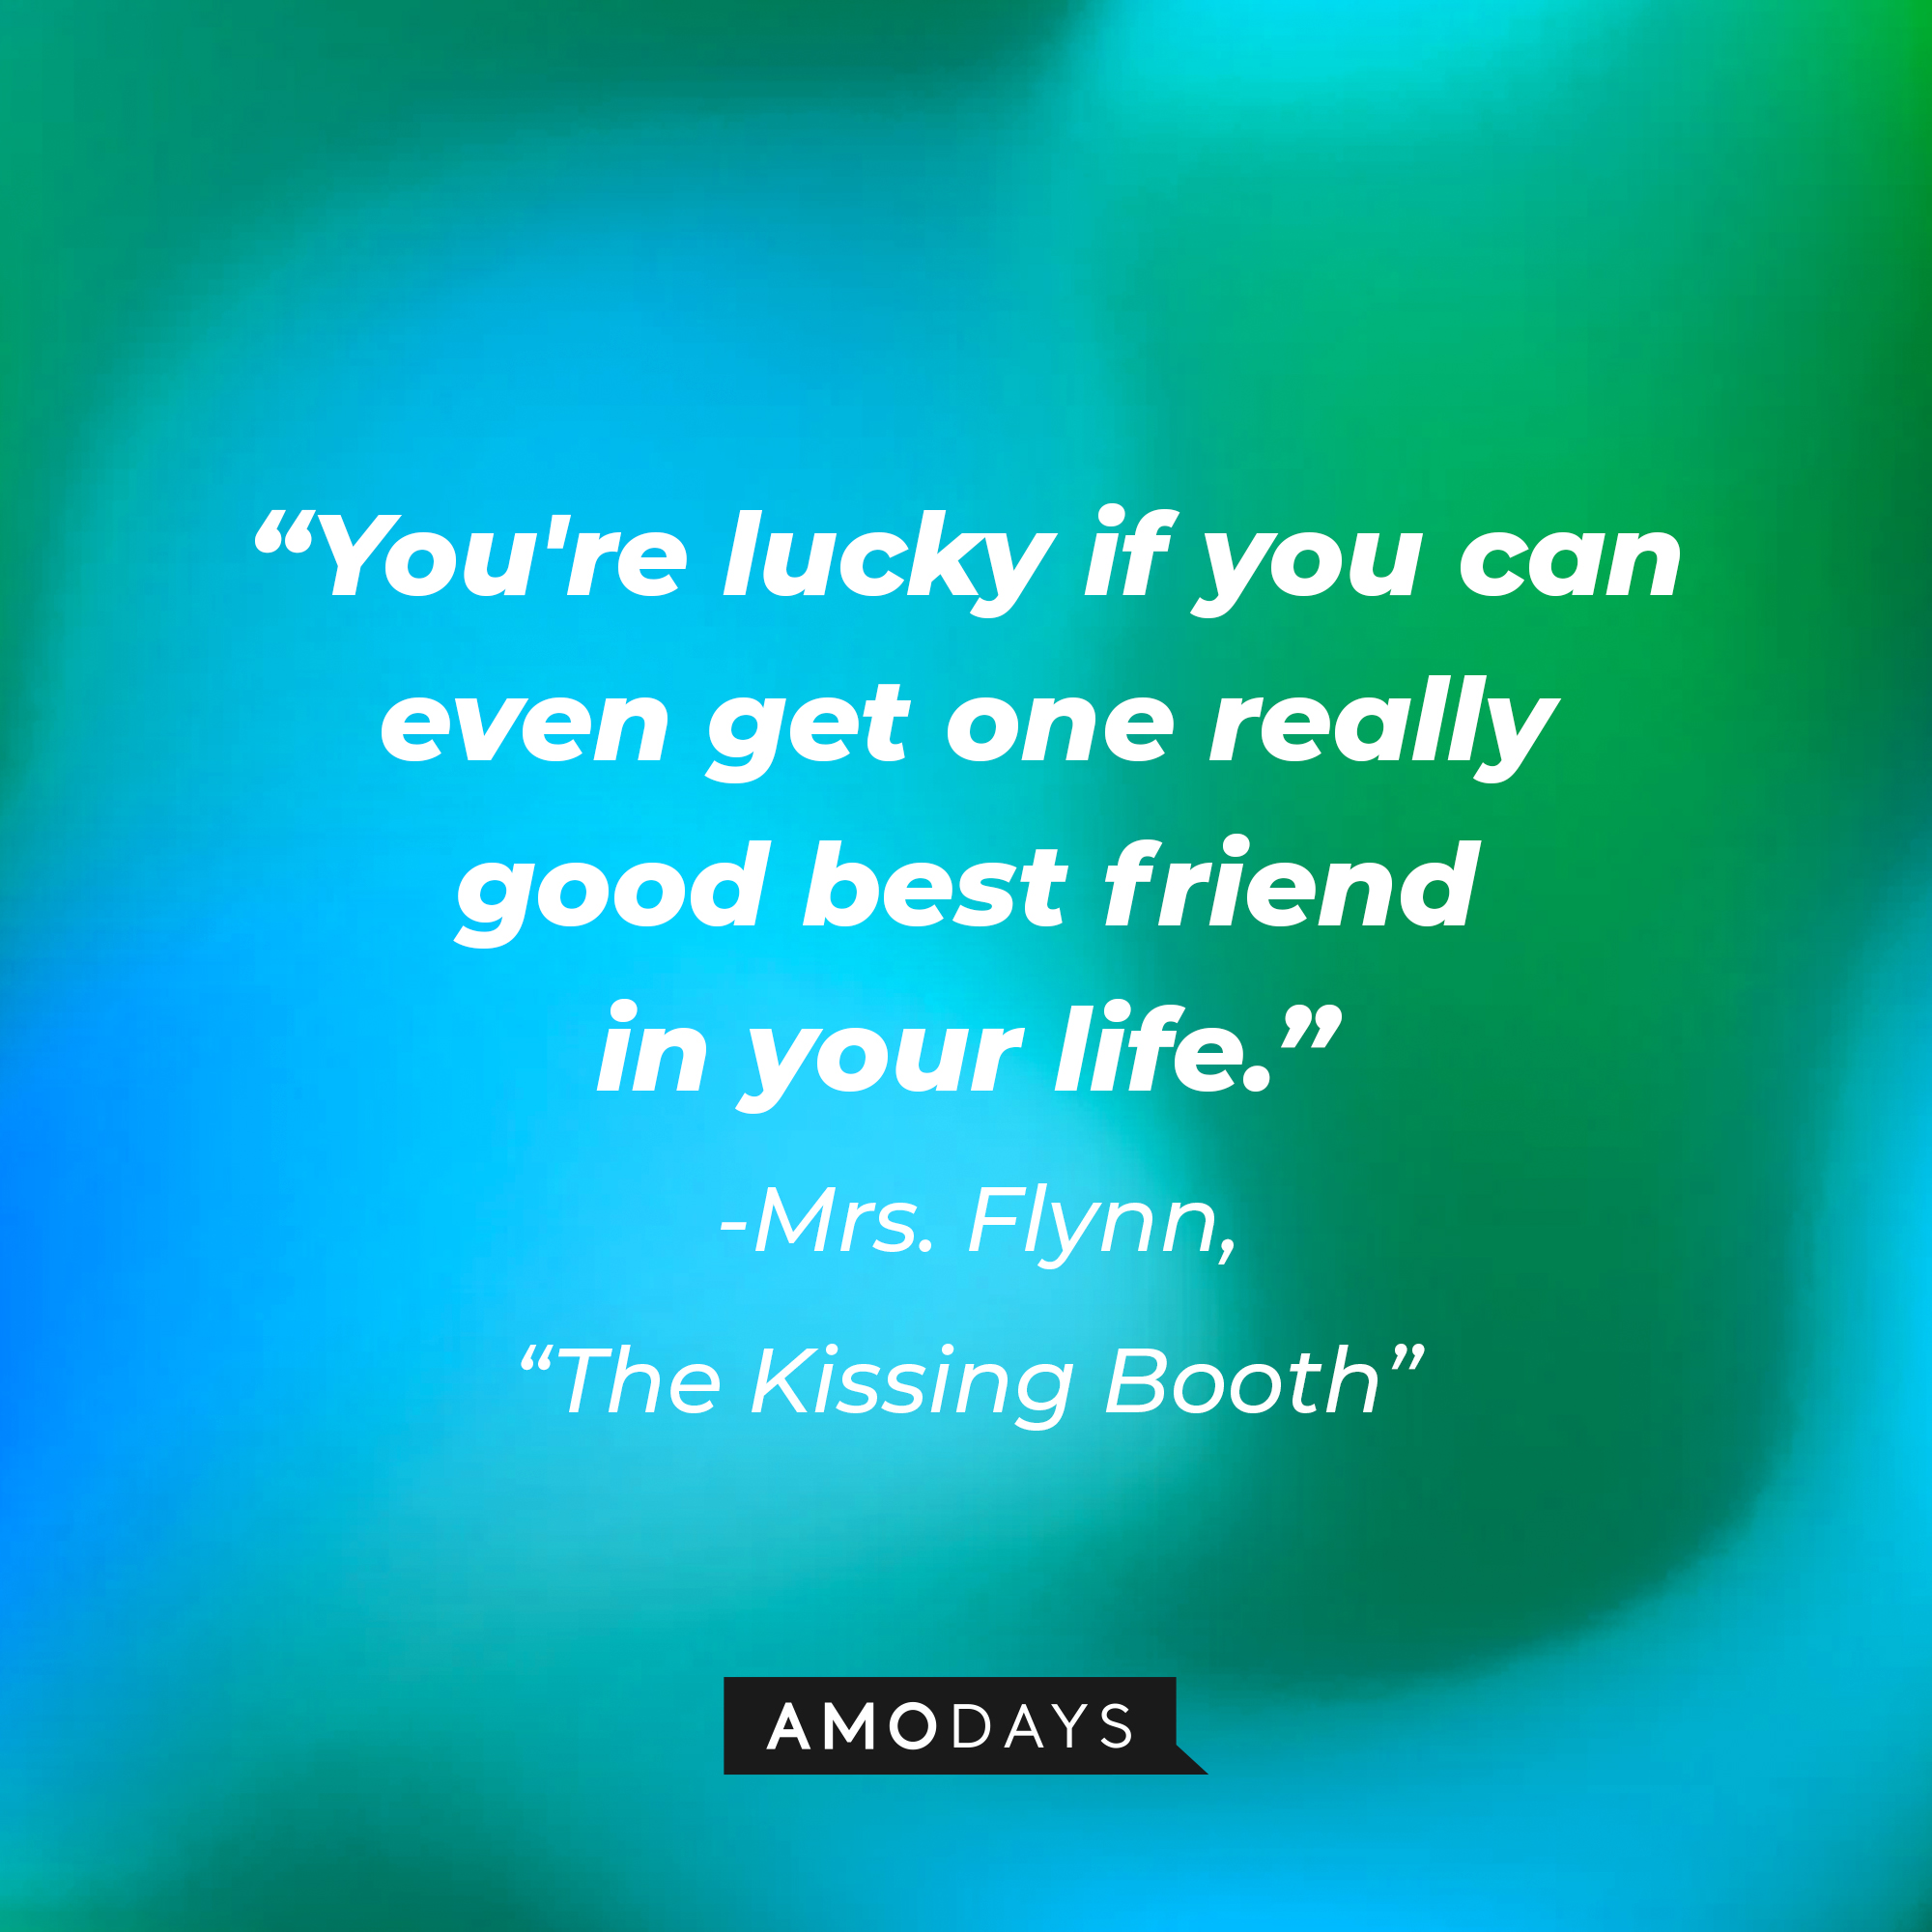 Mrs.. Flynn’s quote: "You're lucky if you can even get one really good best friend in your life."